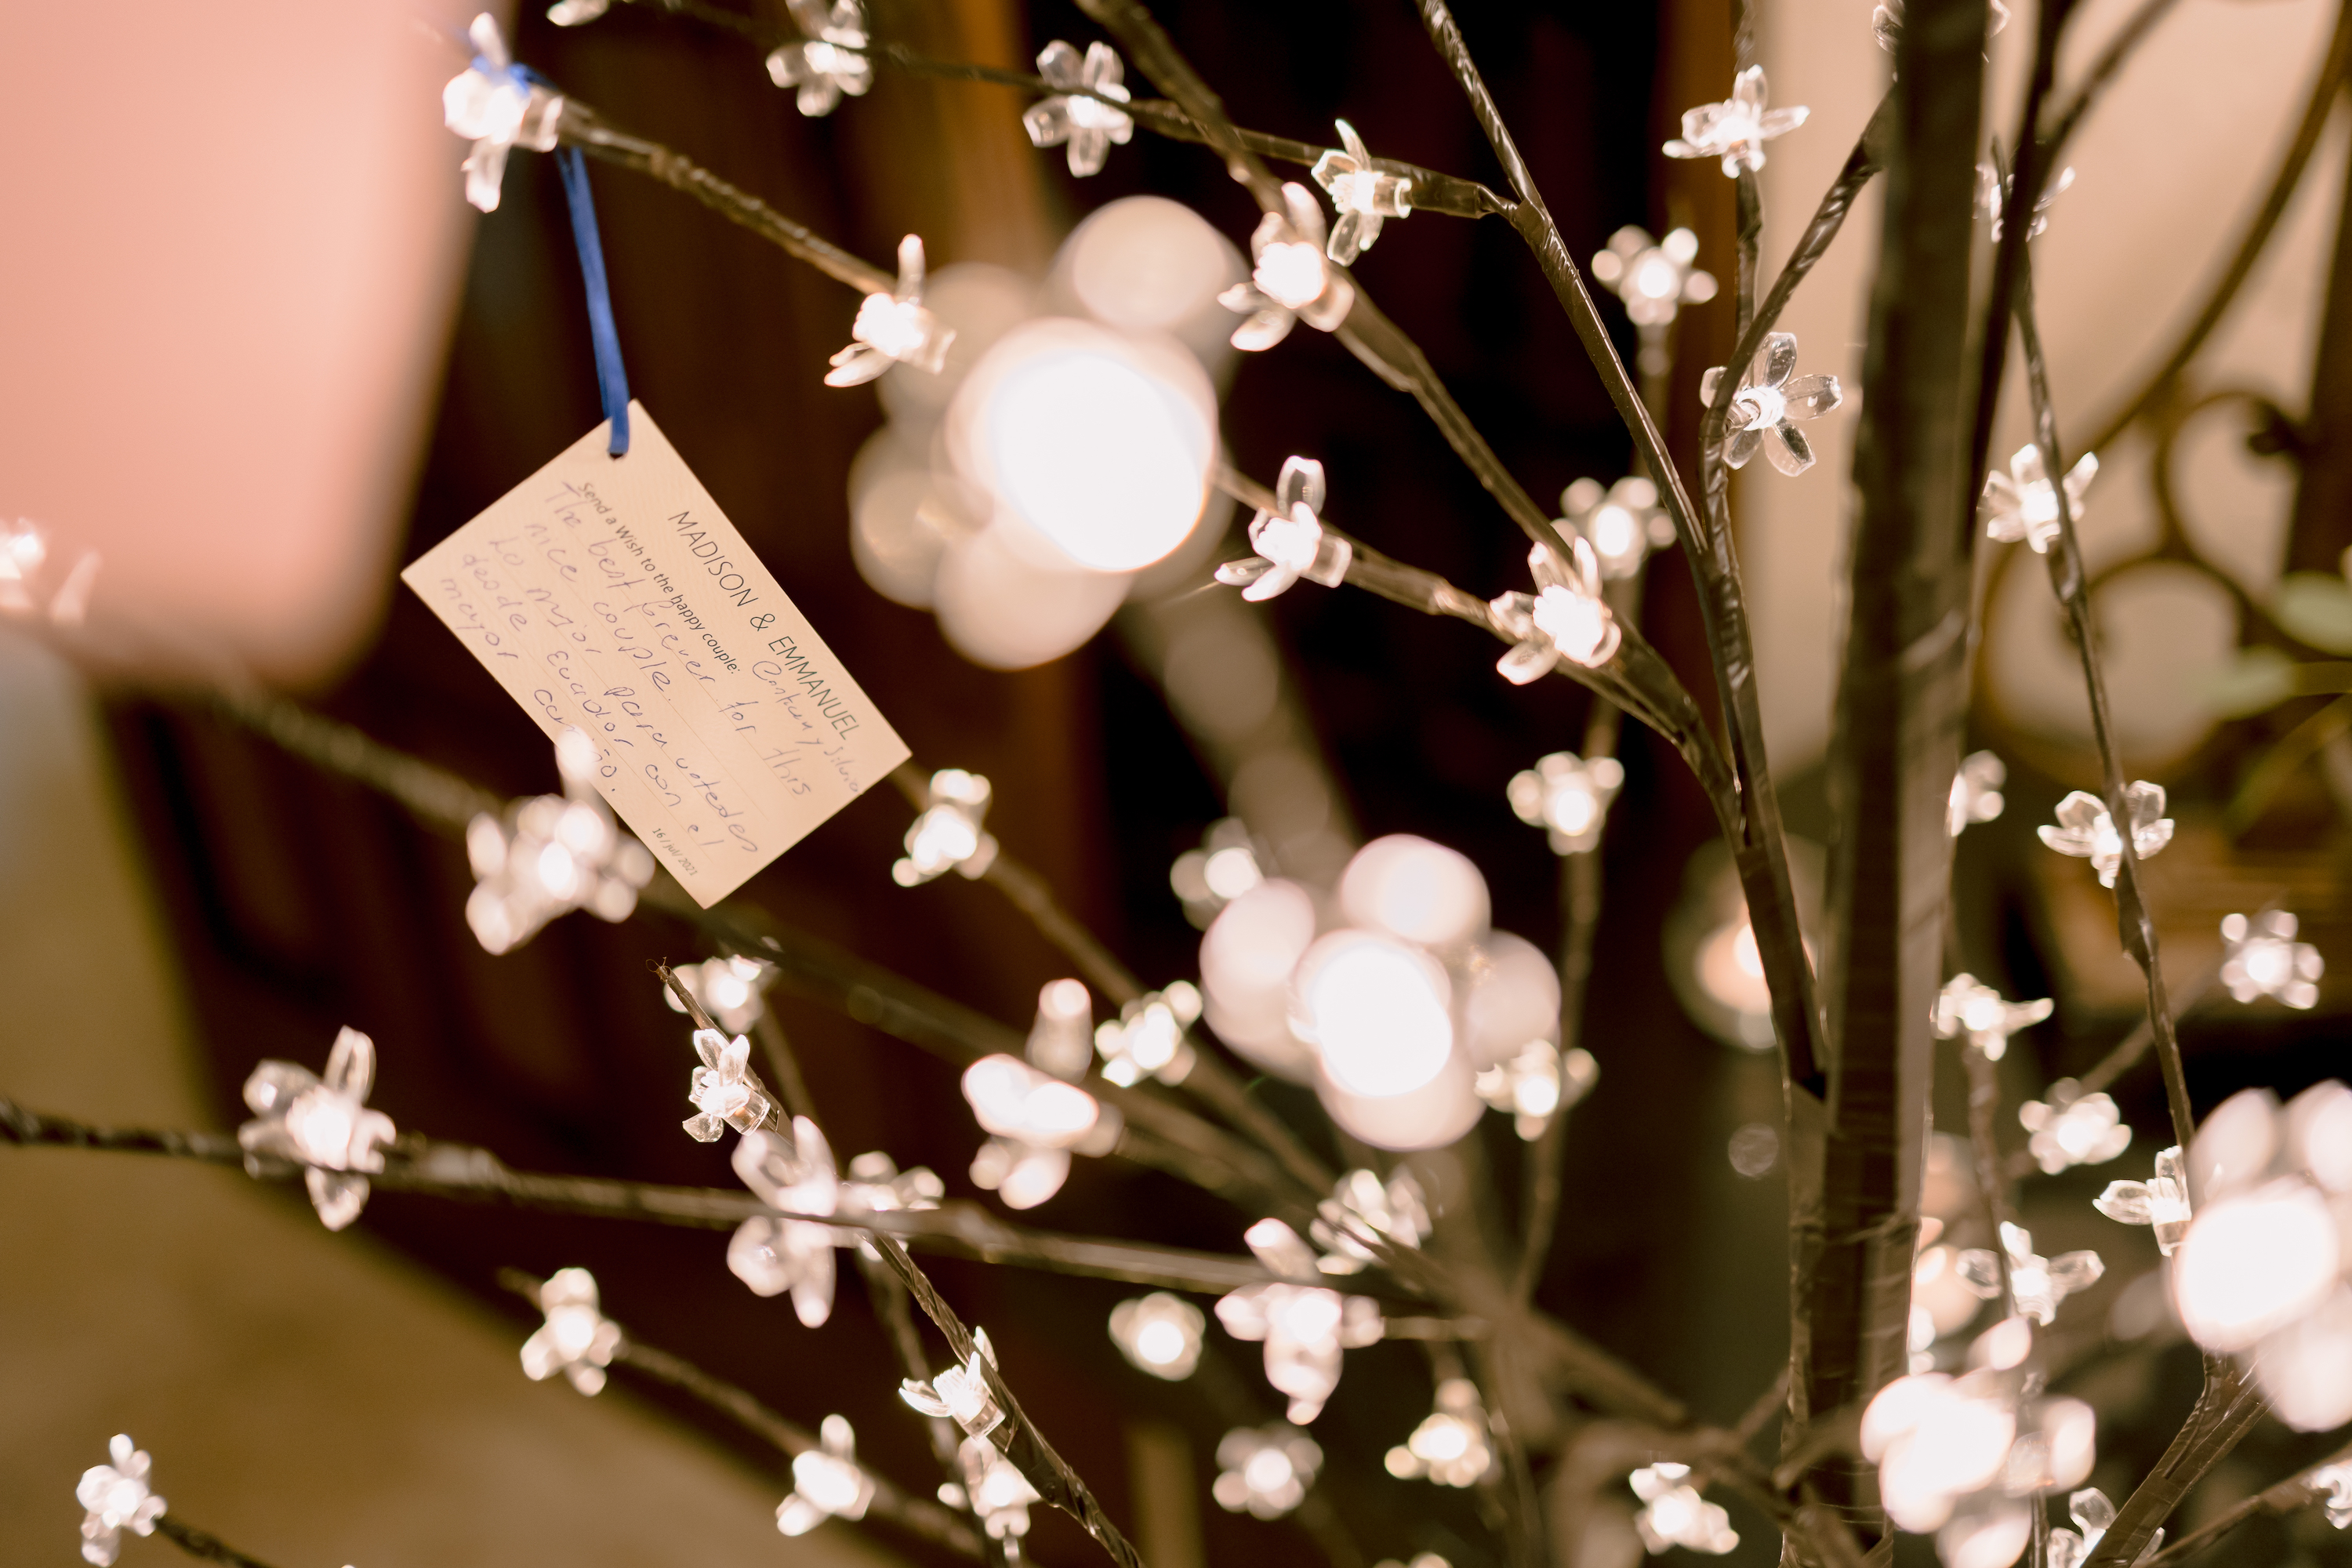 A wishing tree for wedding guests to write notes on for the couple.